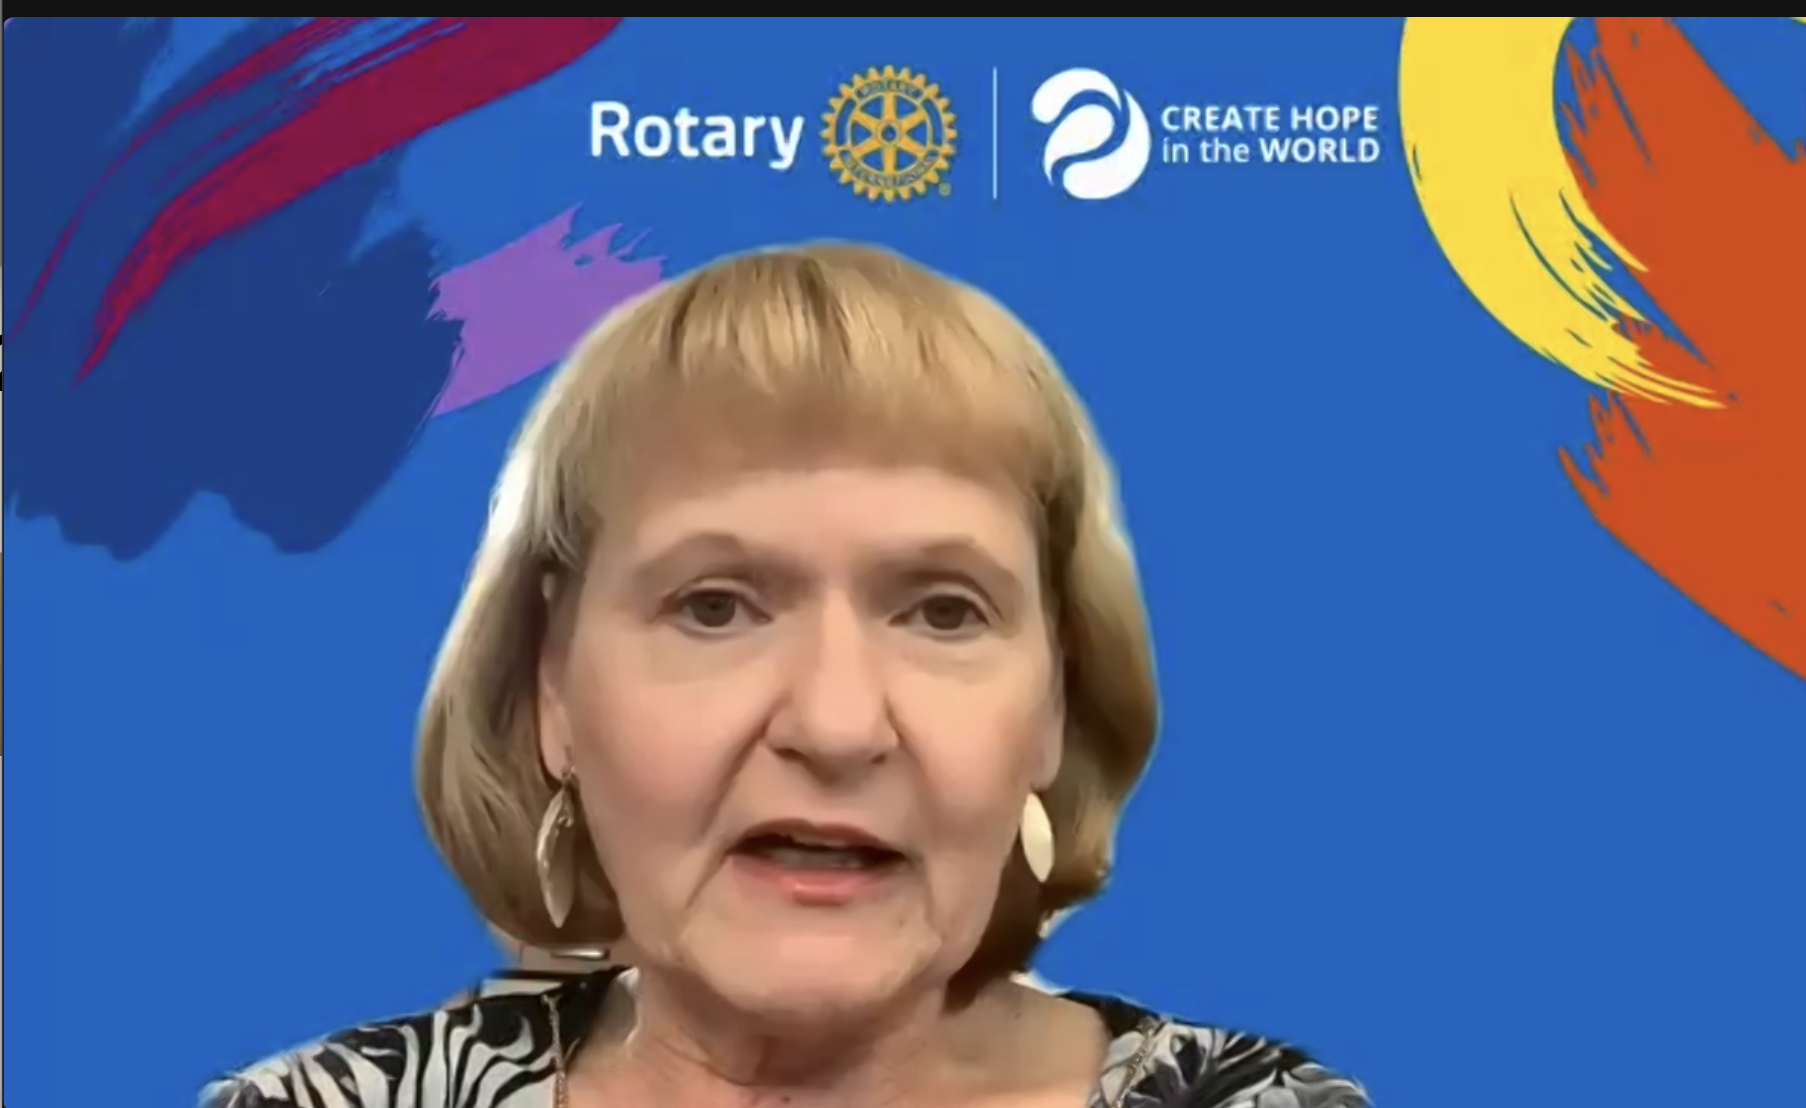 Ramping Up Rotary’s Climate Action